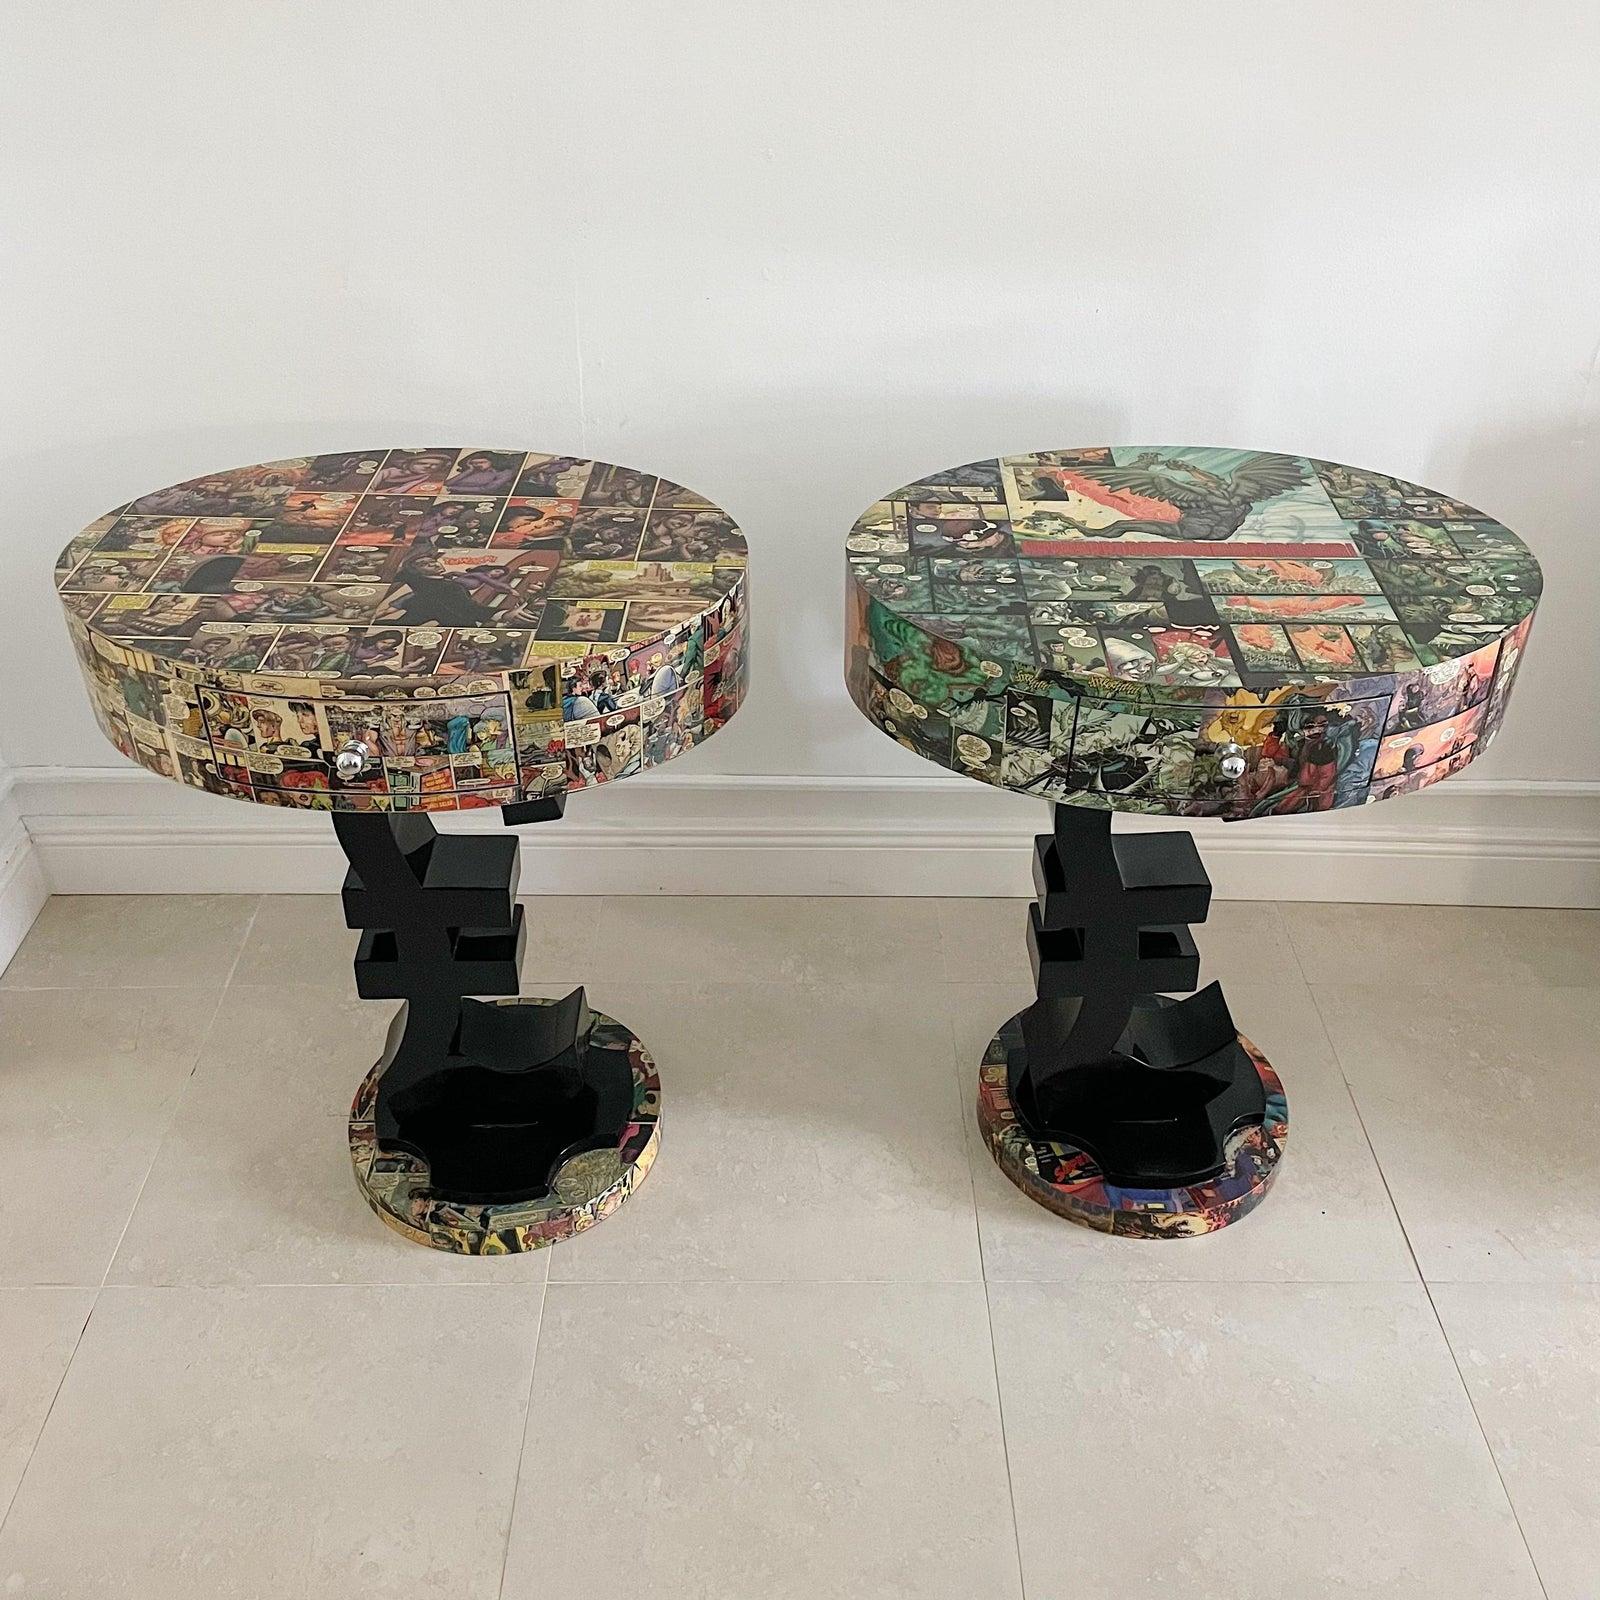 Pair of lacquered custom 1990's wood side tables with British pound sign and comic decoupage tops, An homager to Kurt Swan.
Douglas Curtis Swan (February 17, 1920 – June 17, 1996)[2] was an American comics artist. The artist most associated with